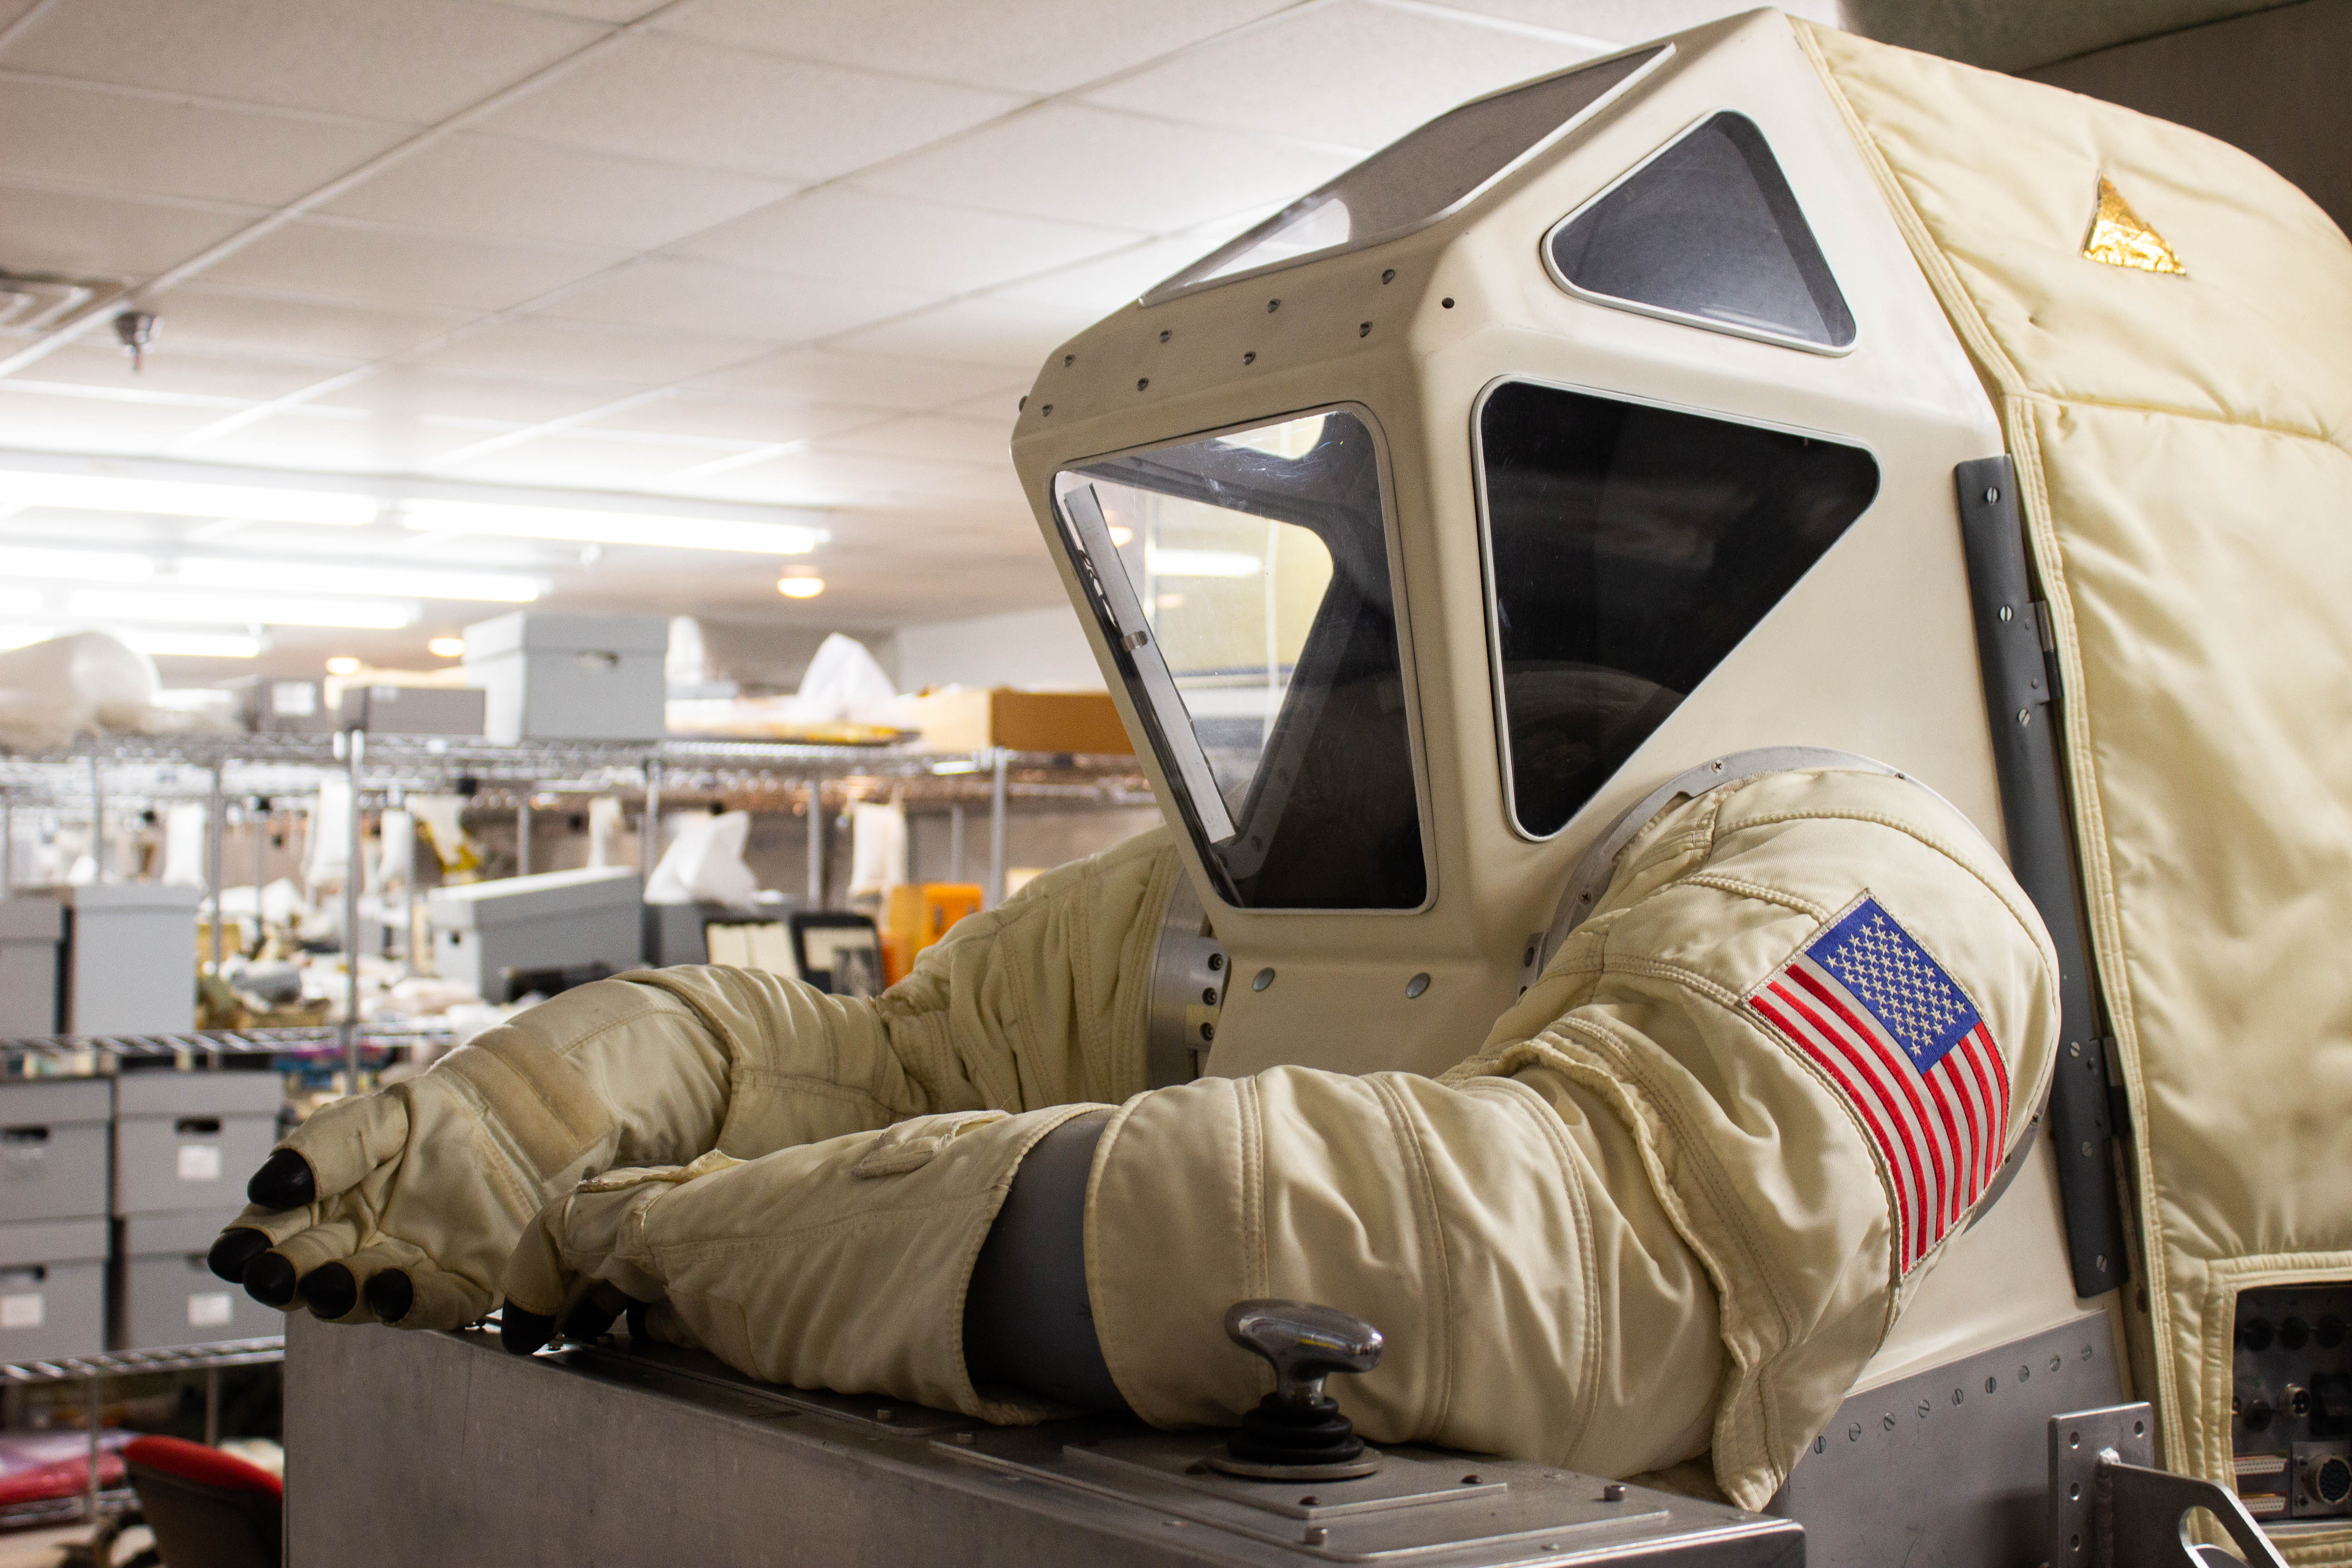 off-white empty spacesuit propped up with storage boxes in the background